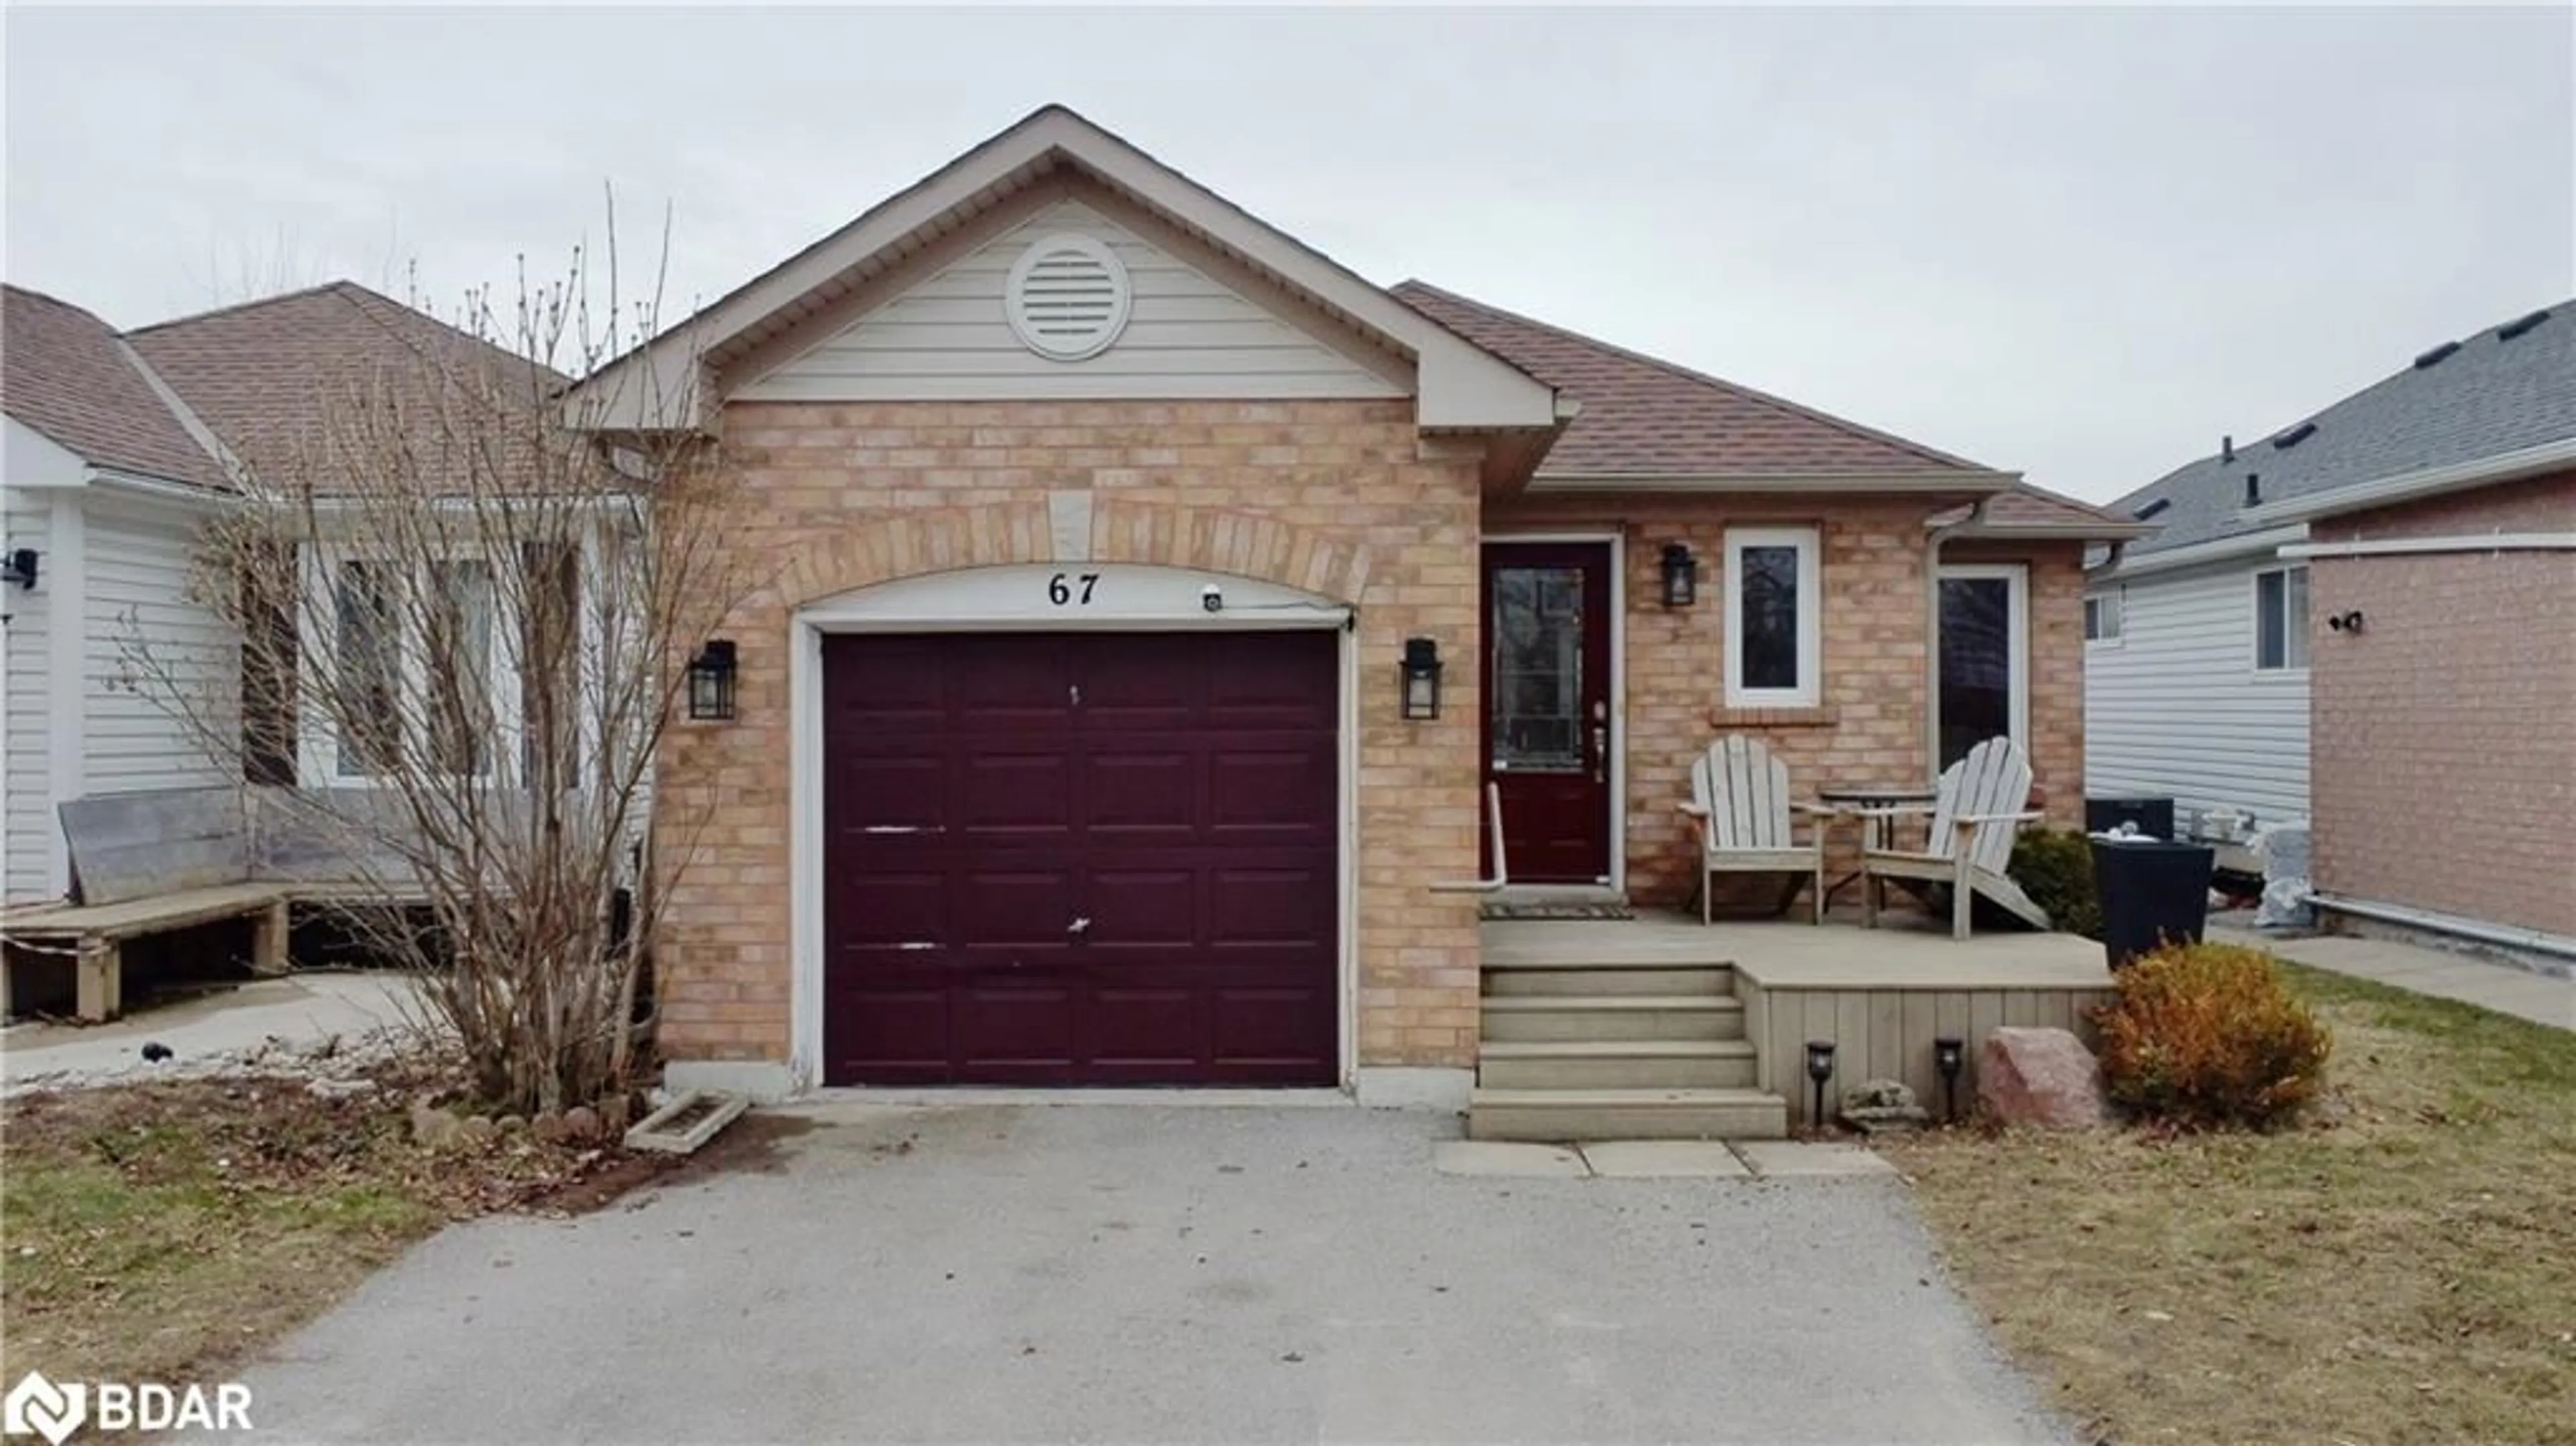 Home with brick exterior material for 67 Moir Cres, Barrie Ontario L4N 8B2